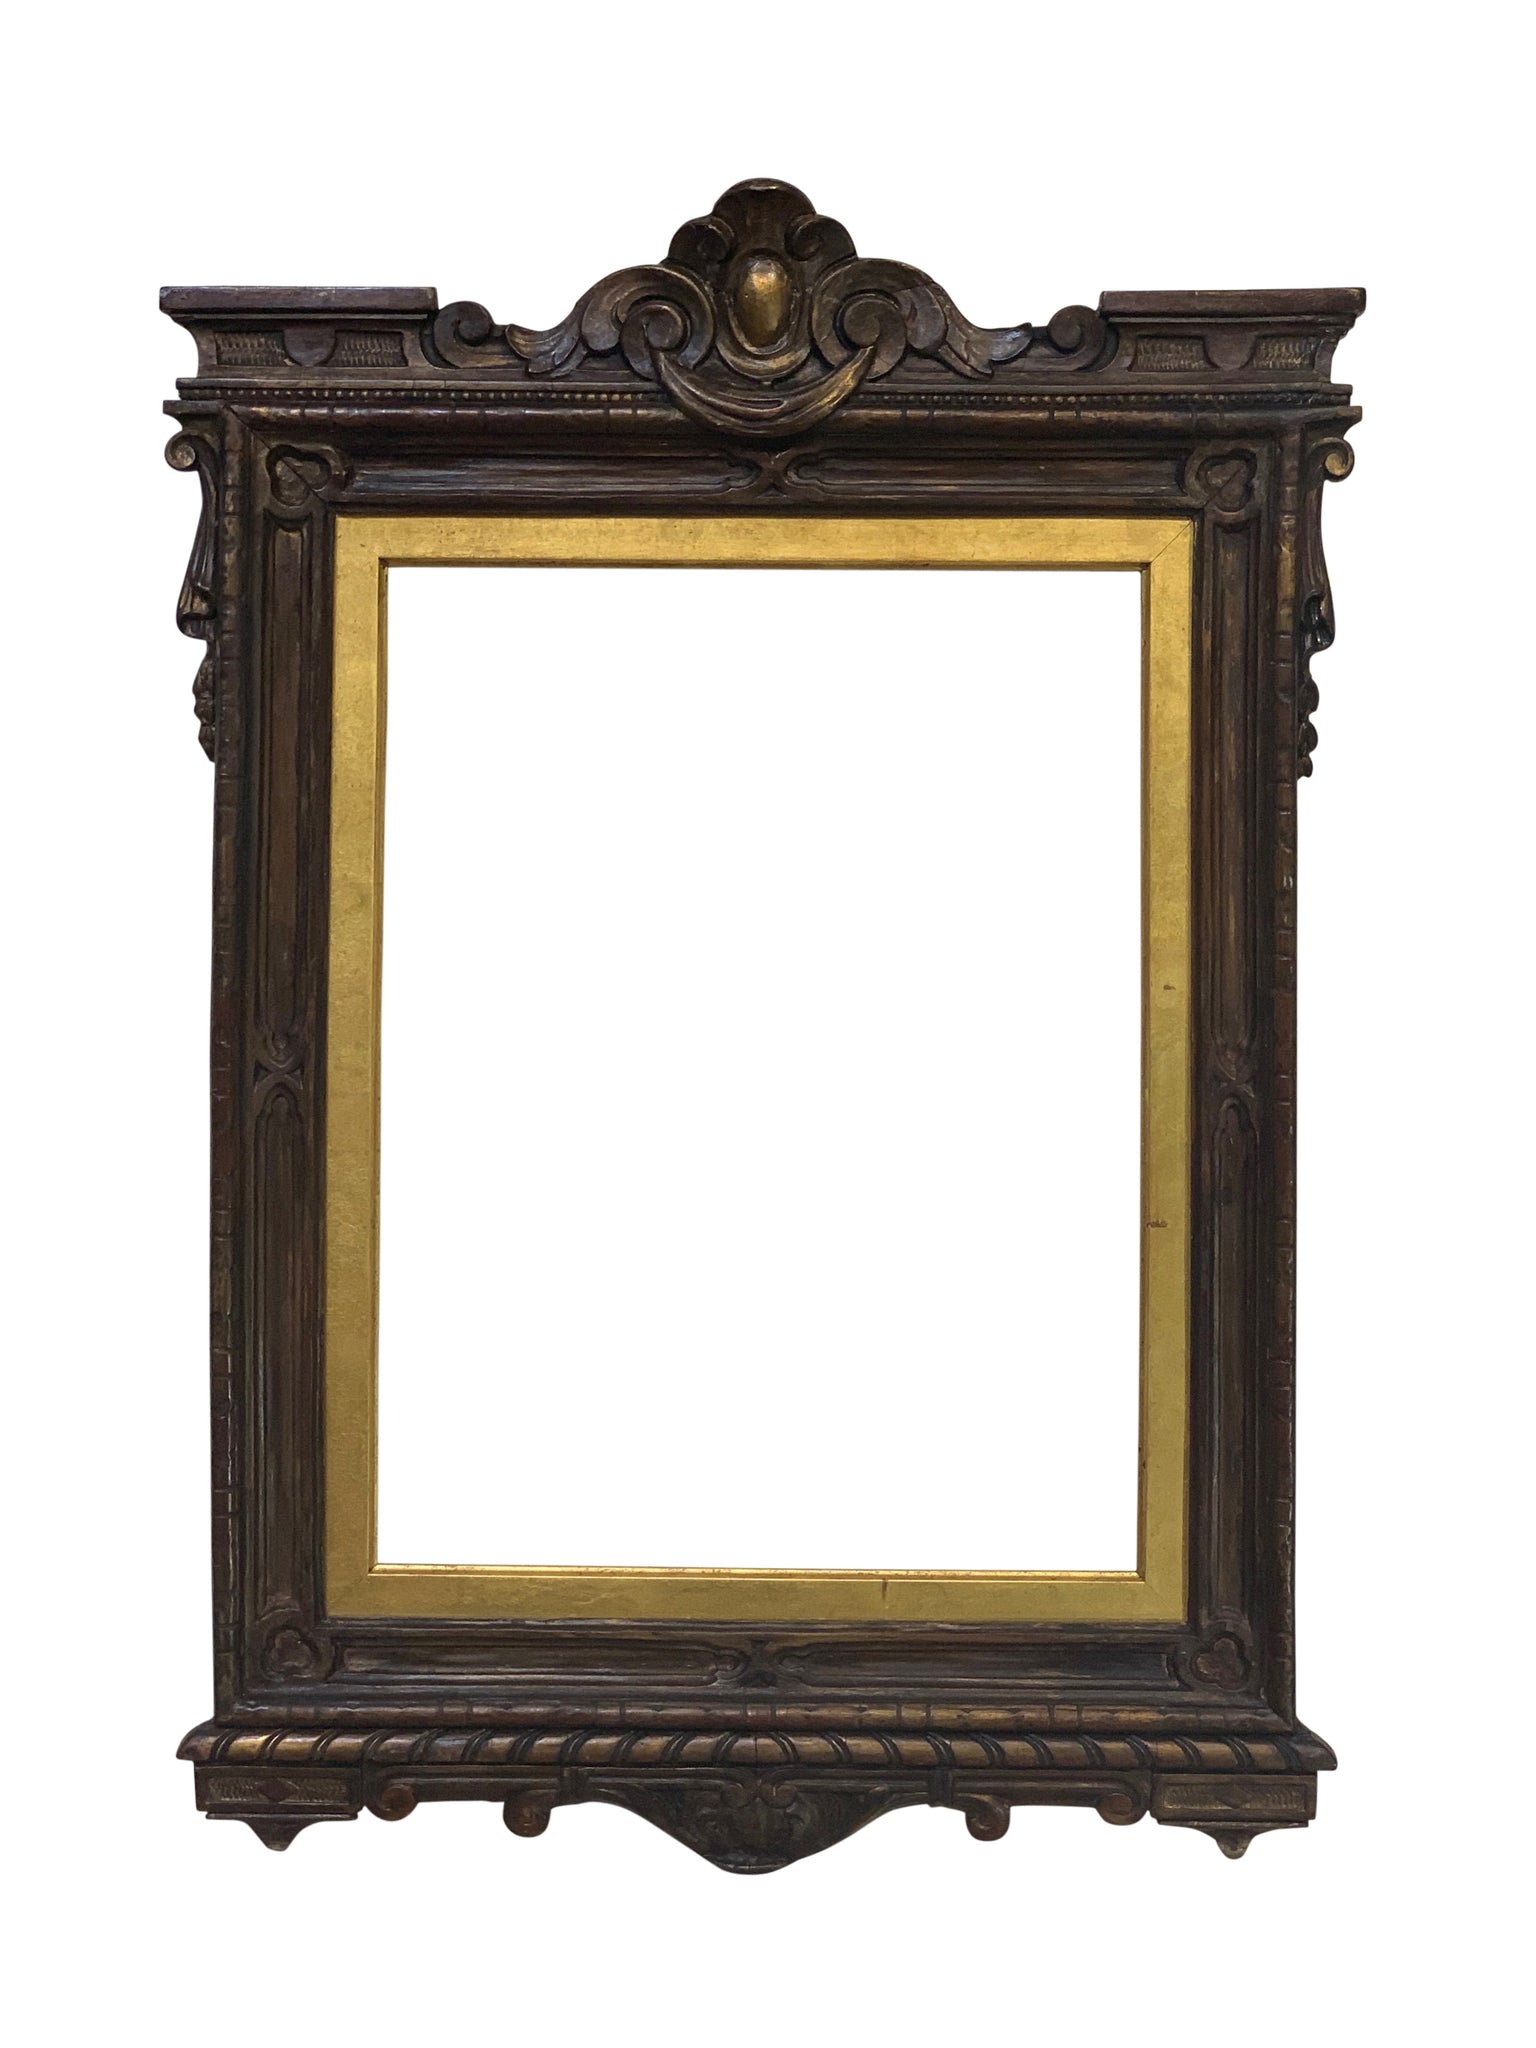 10x14 inch Antique Brown and Gold Walnut Picture Frame For Canvas Art circa 1875 (19th Century American).